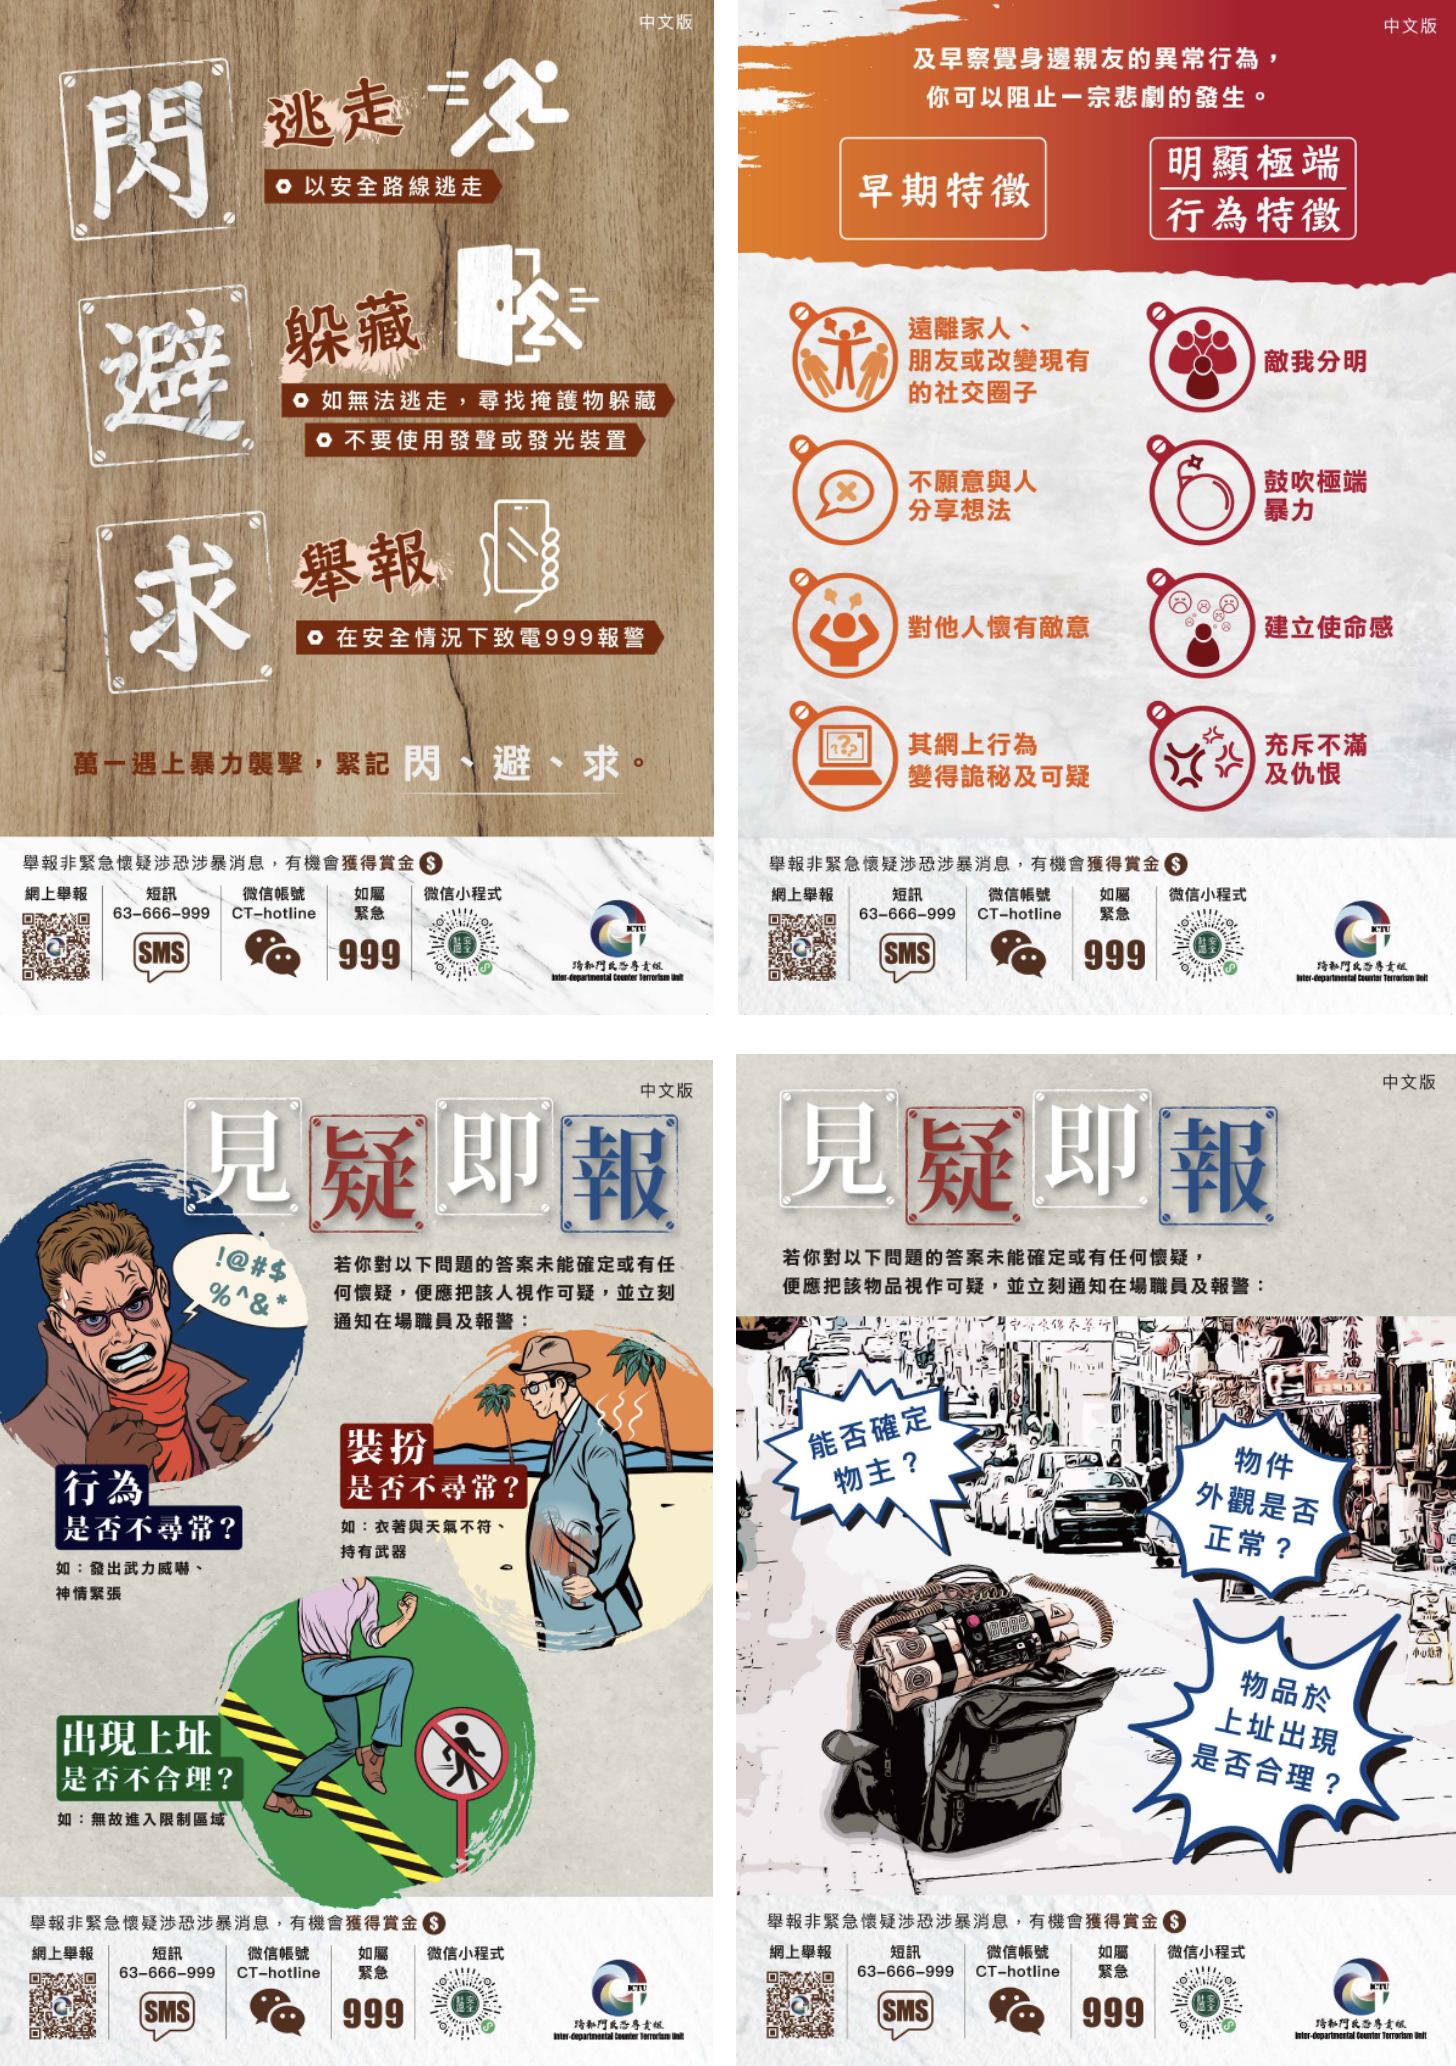 ‘Run, Hide, Report’, ‘Spot and Report – suspicious person’, ‘Spot and Report – suspicious objects’ and ‘Guidelines for identifying Extremist Thoughts’  – Chinese version